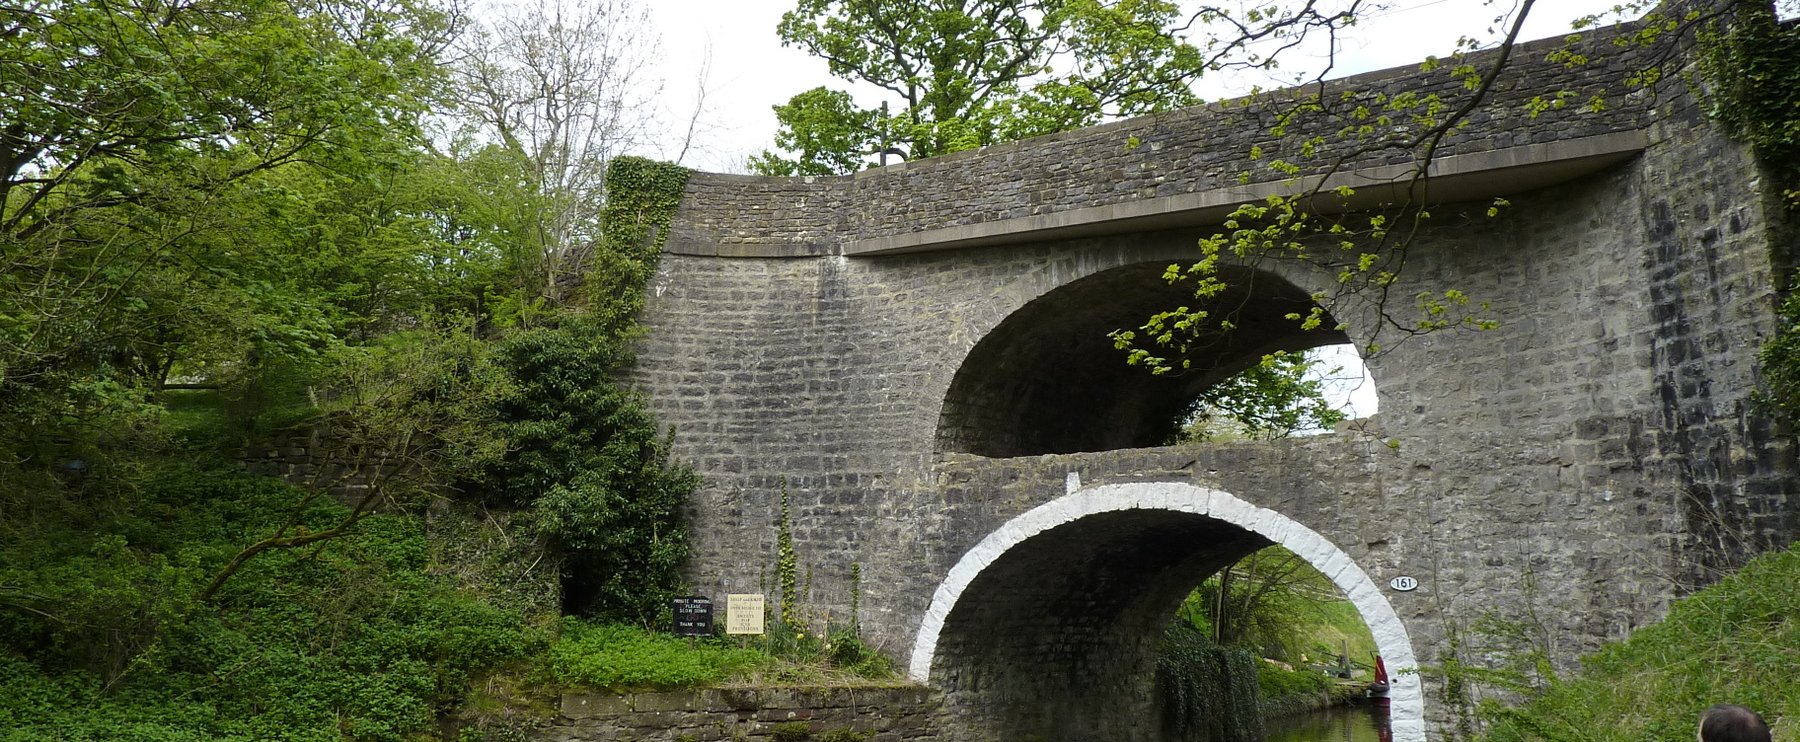 Double-arch bridge on the Leeds-Liverpool canal